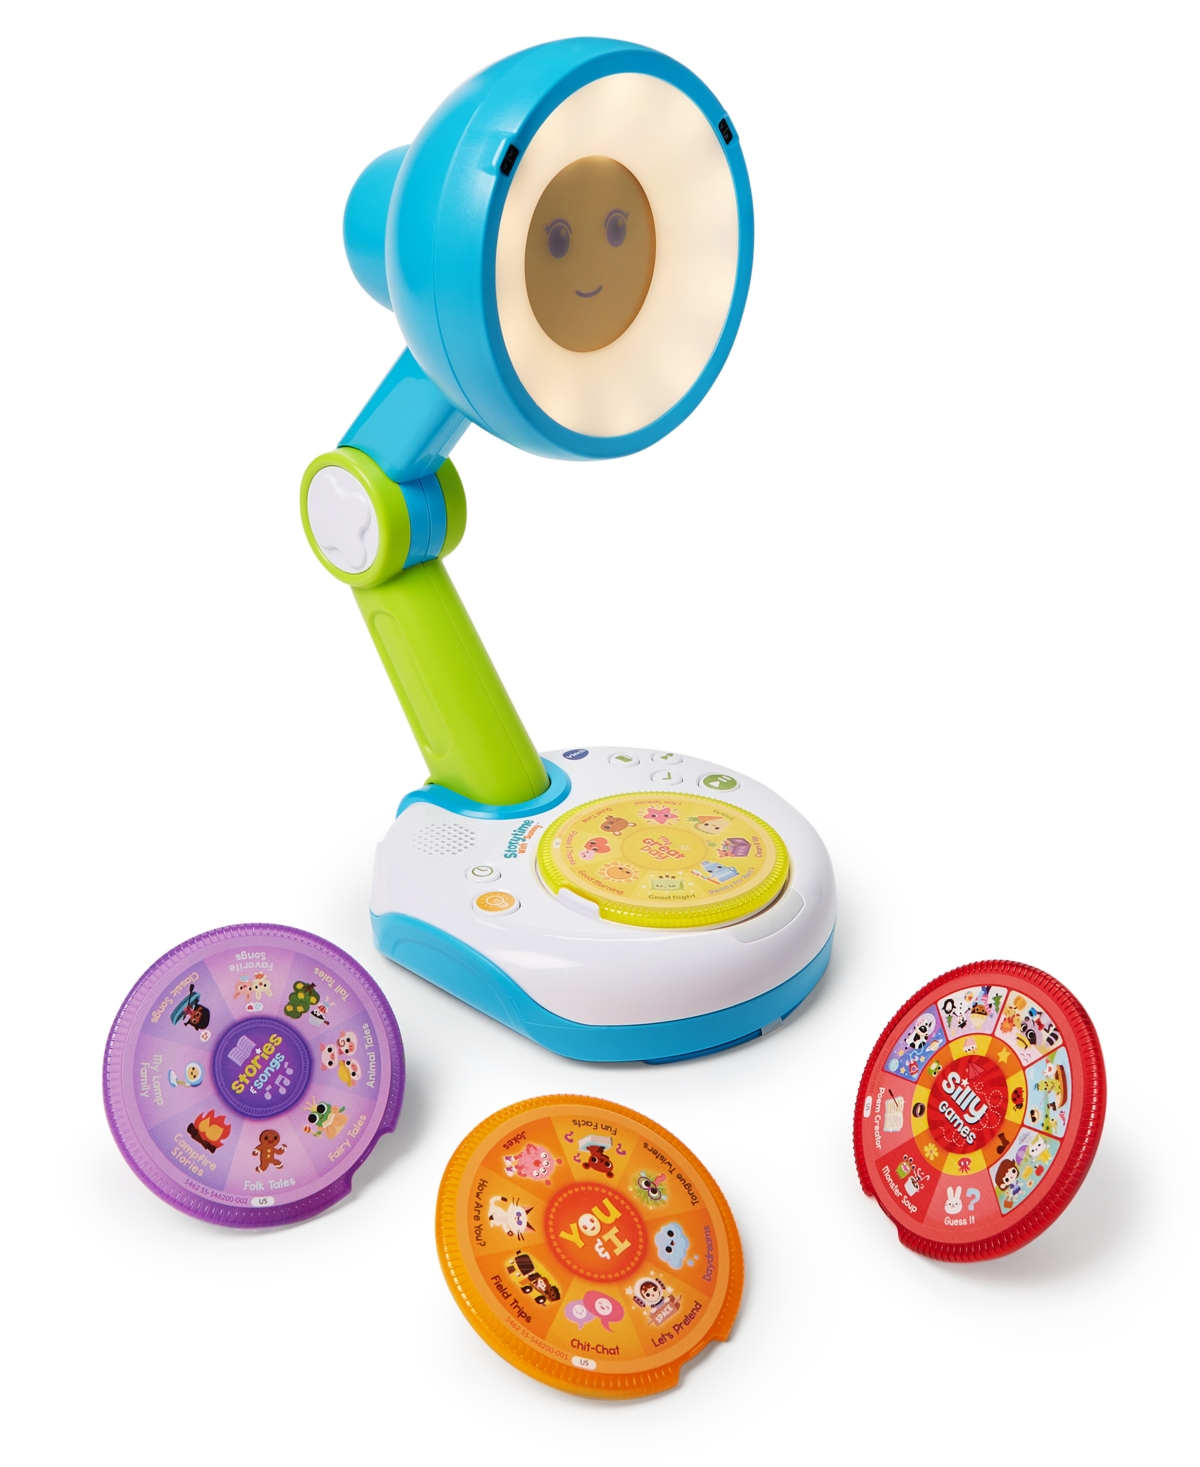 Vtech Storytime With Sunny Interactive Friend And 4 Activity Disks In Multi